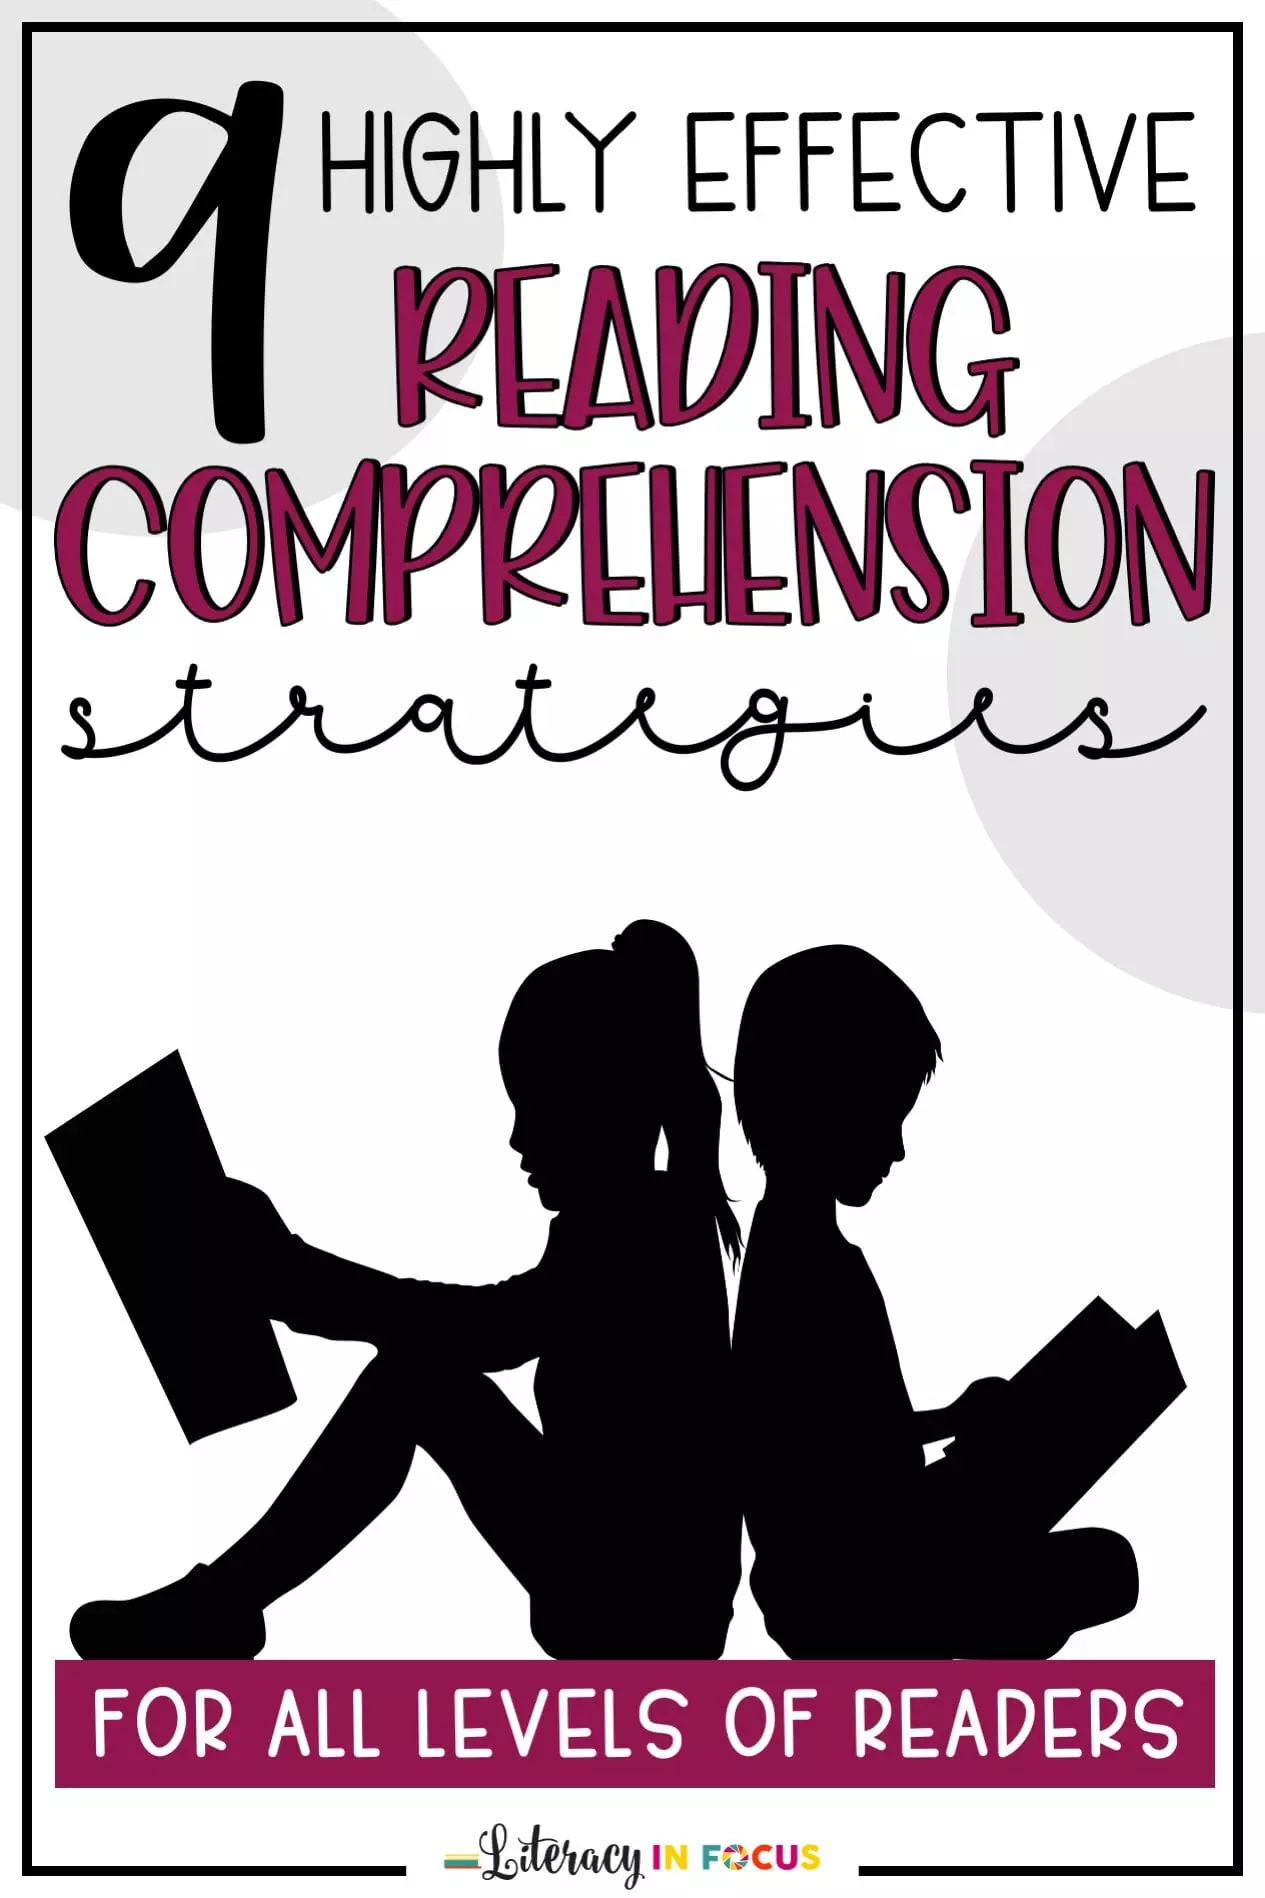 9 Highly Effective Reading Comprehension Strategies For All Levels Of Readers